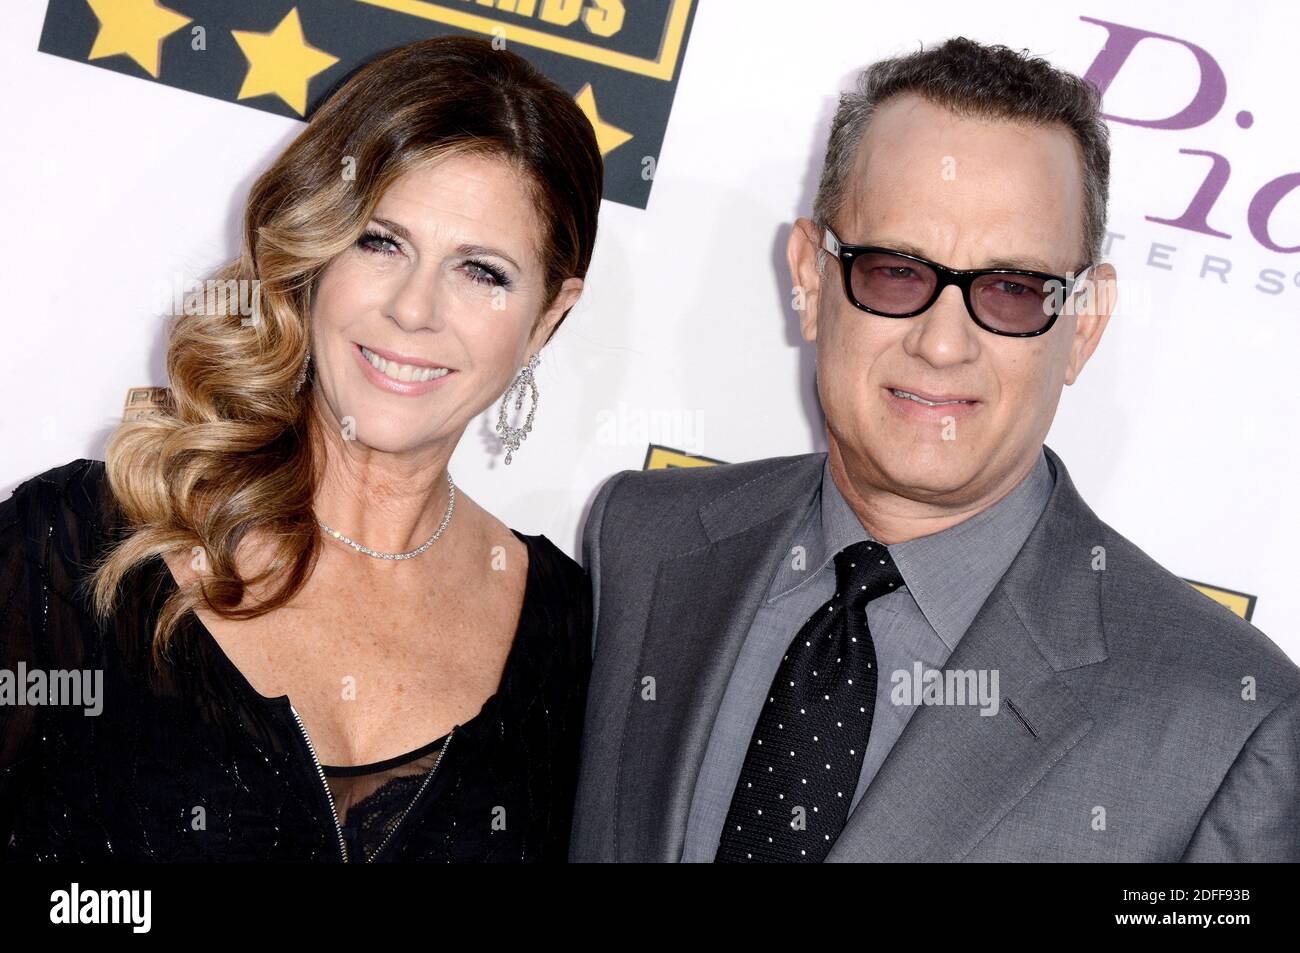 File photo dated January 16, 2014 of Rita Wilson and Tom Hanks attend the  19th Annual Critics' Choice Movie Awards at Barker Hangar in Santa Monica,  Los Angeles, CA, USA. American movie